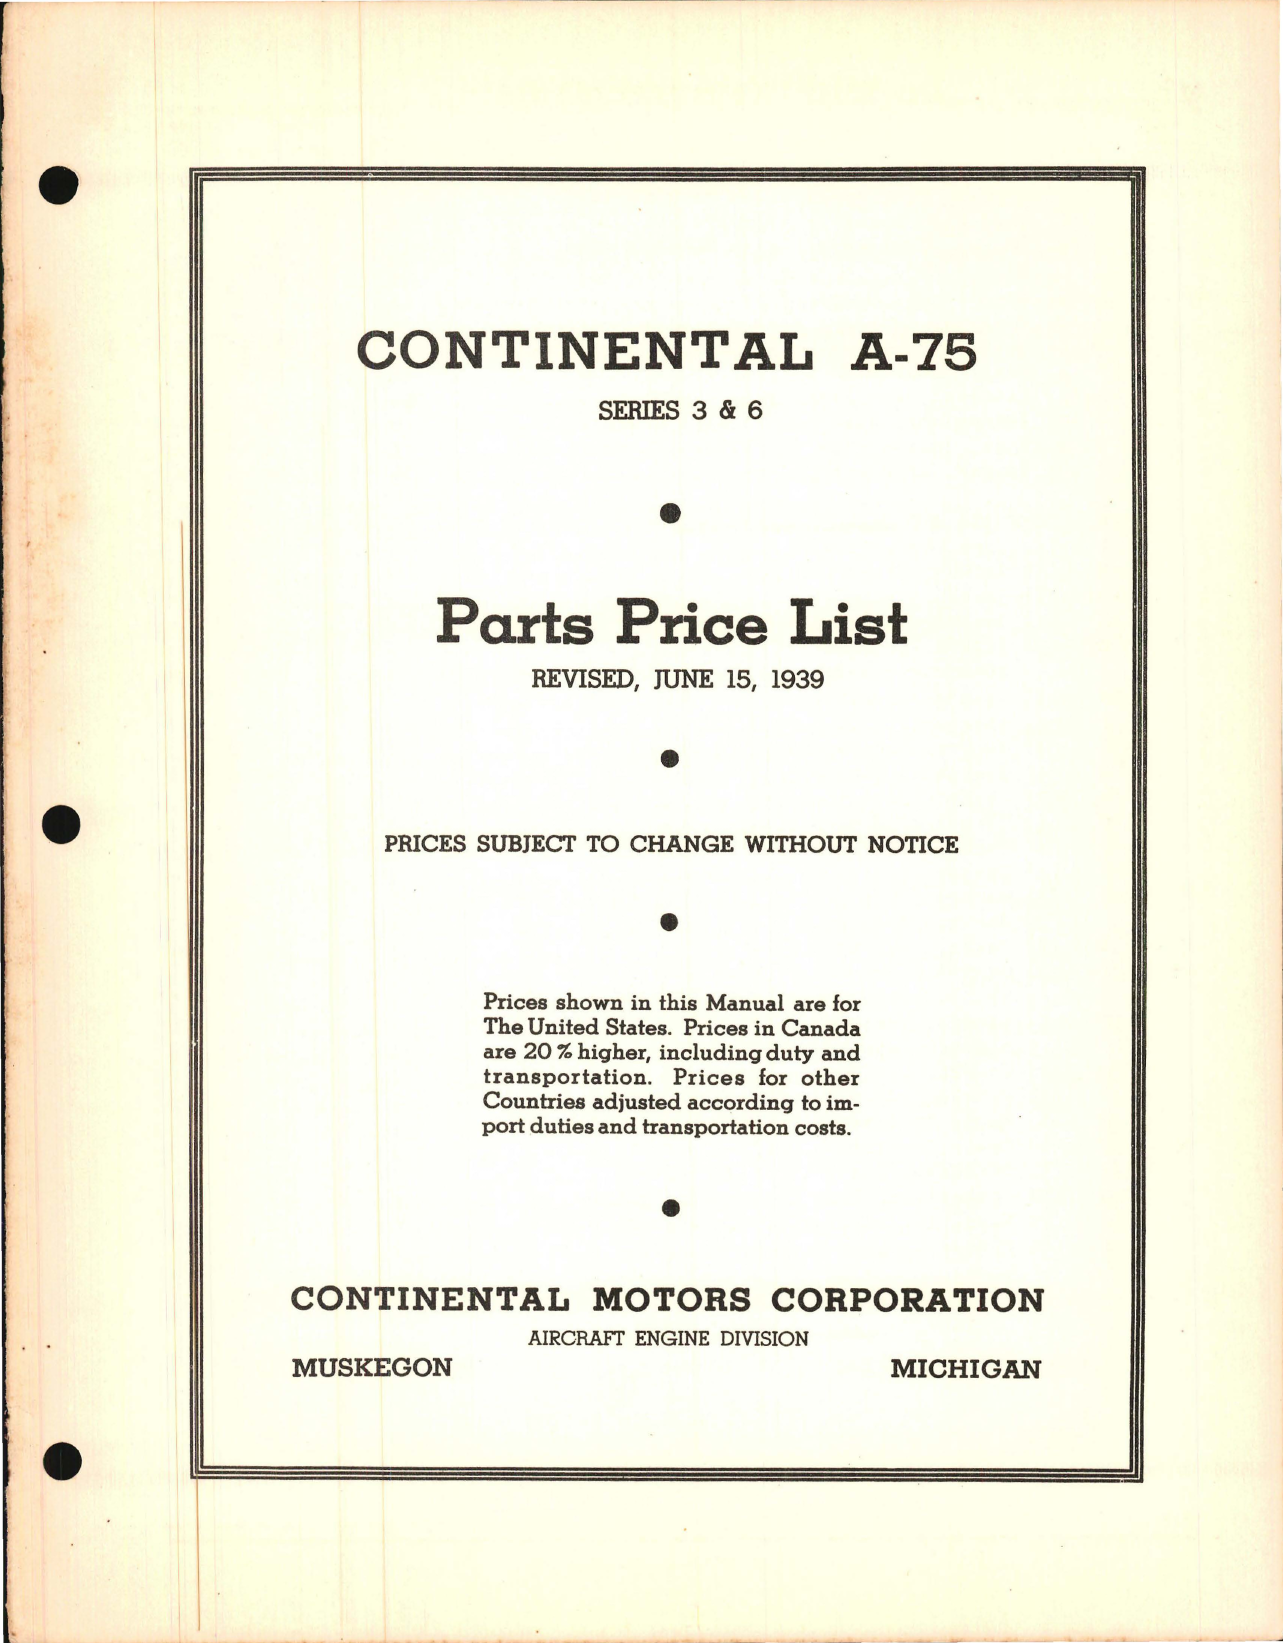 Sample page 1 from AirCorps Library document: Parts Price List for Continental A-75 Series 3 and Series 6